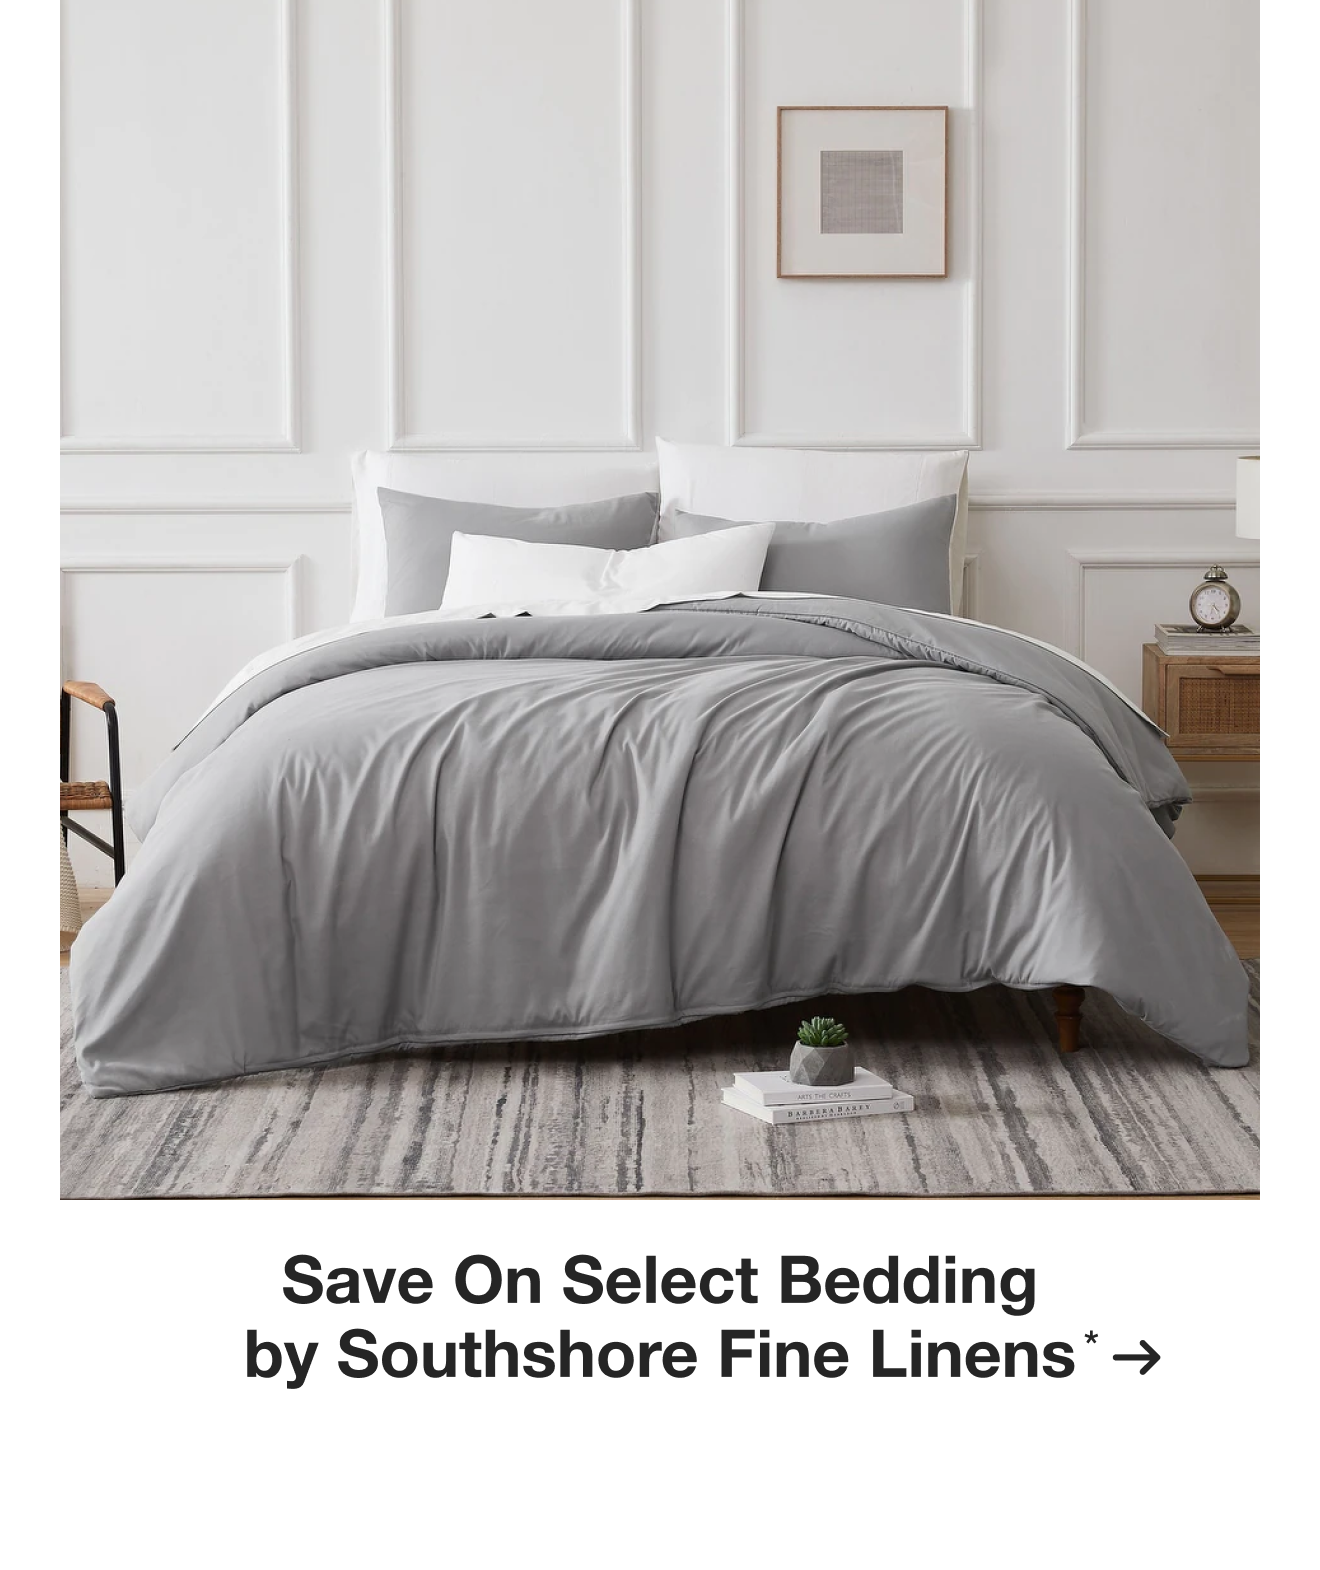 Save On Select Bedding by Southshore Fine Linens